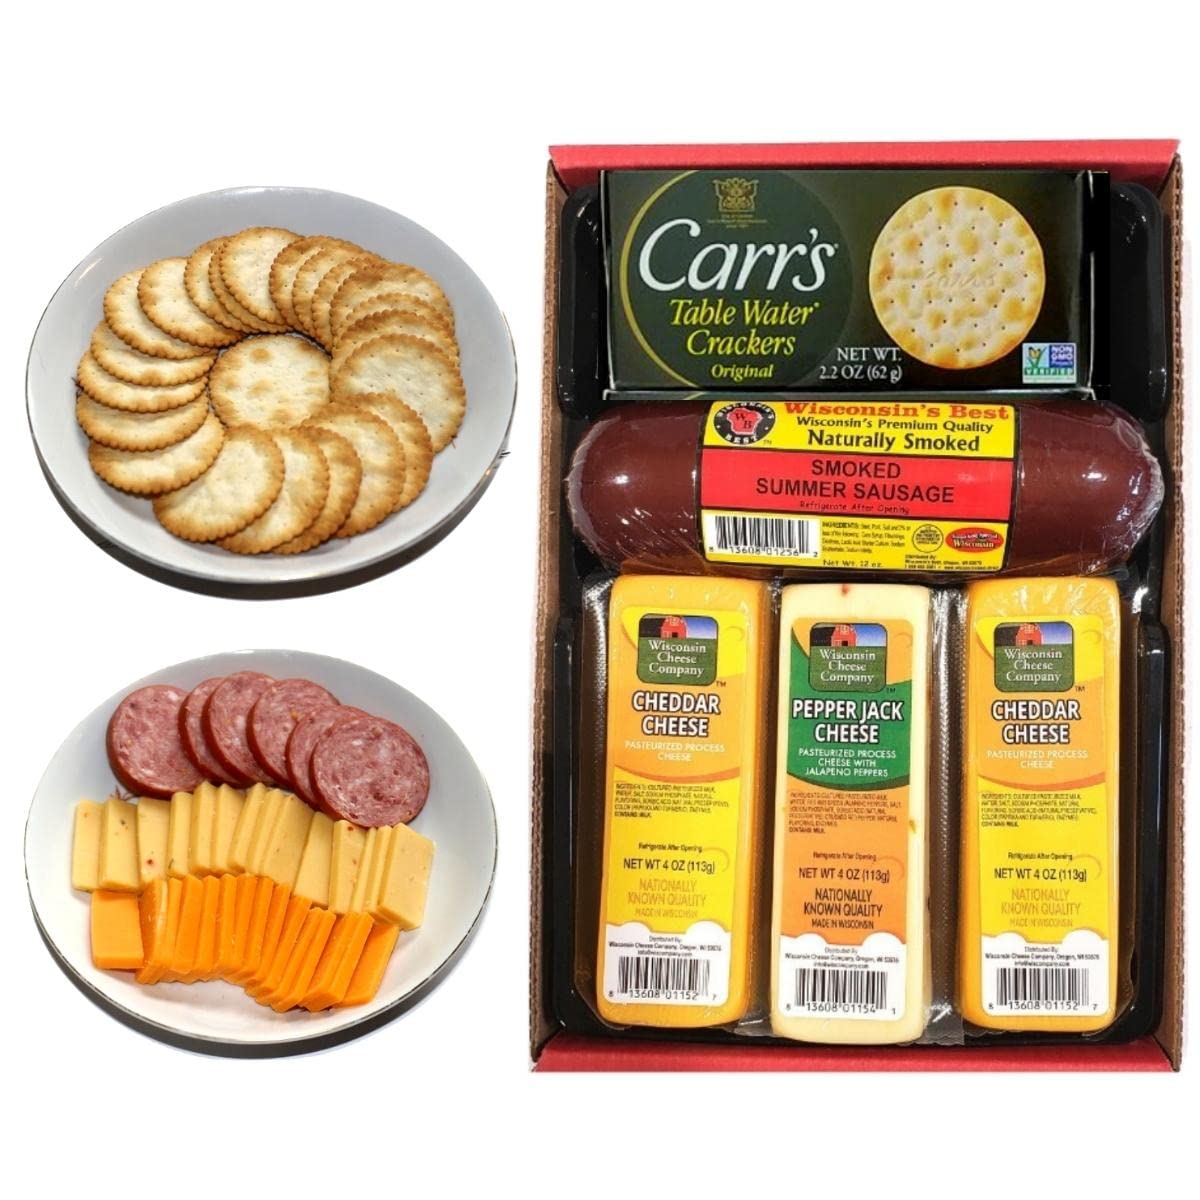 WISCONSIN'S BEST & WISCONSIN CHEESE COMPANY'S Popular Classic Wisconsin Cheese, Sausage & Crackers Gift Basket. 100% Wisconsin Cheddar Chee...